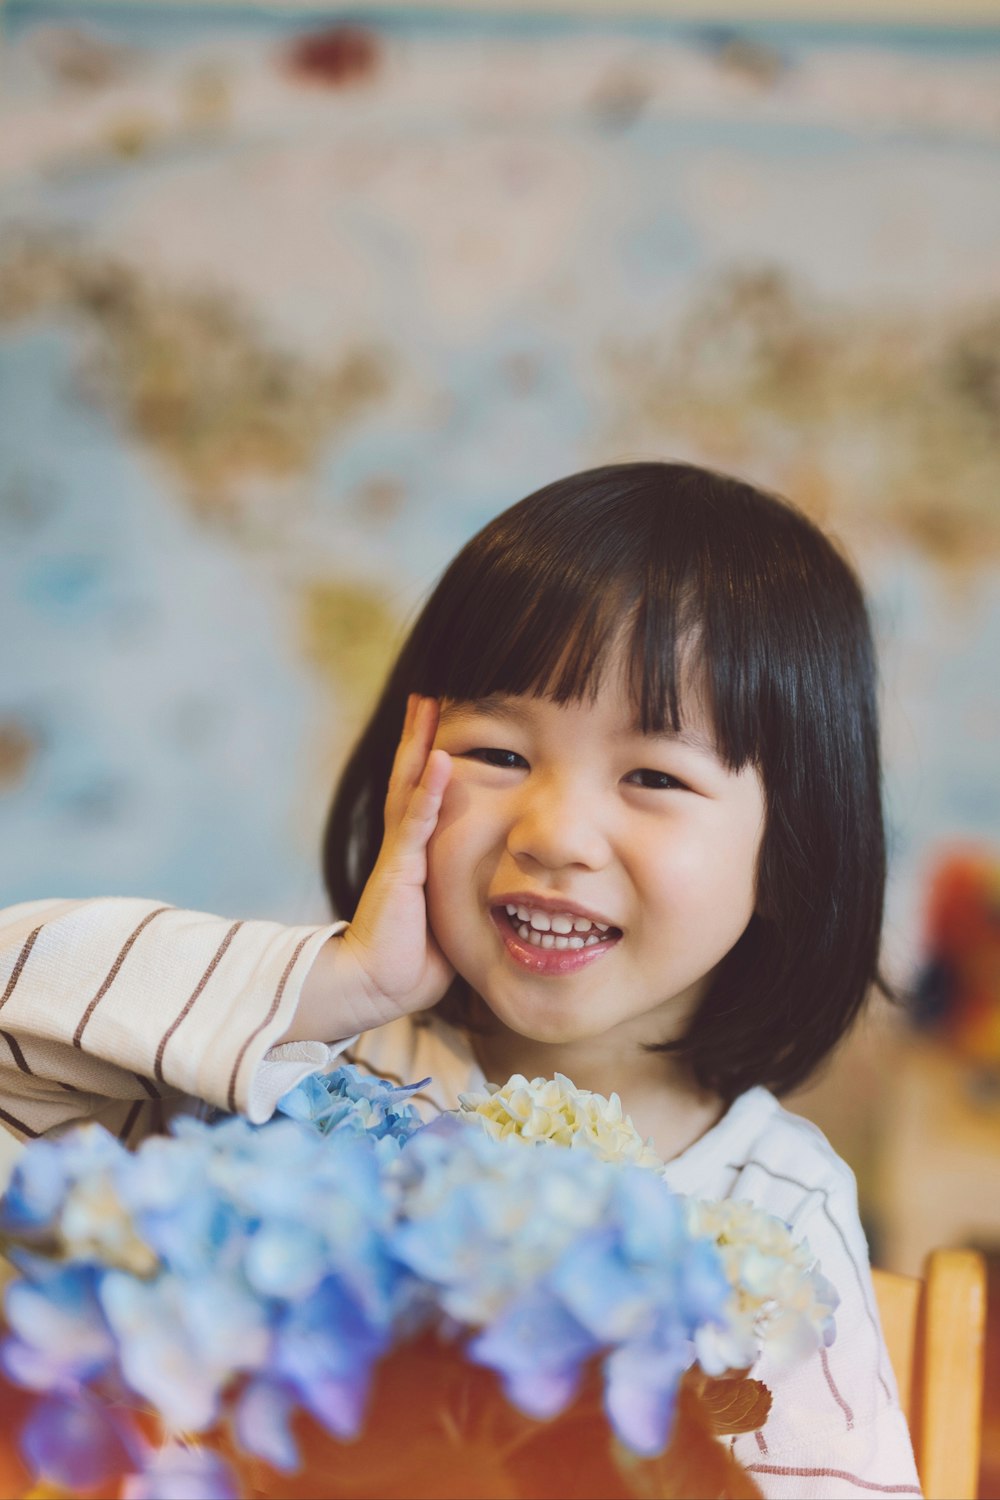 a little girl sitting at a table with blue flowers